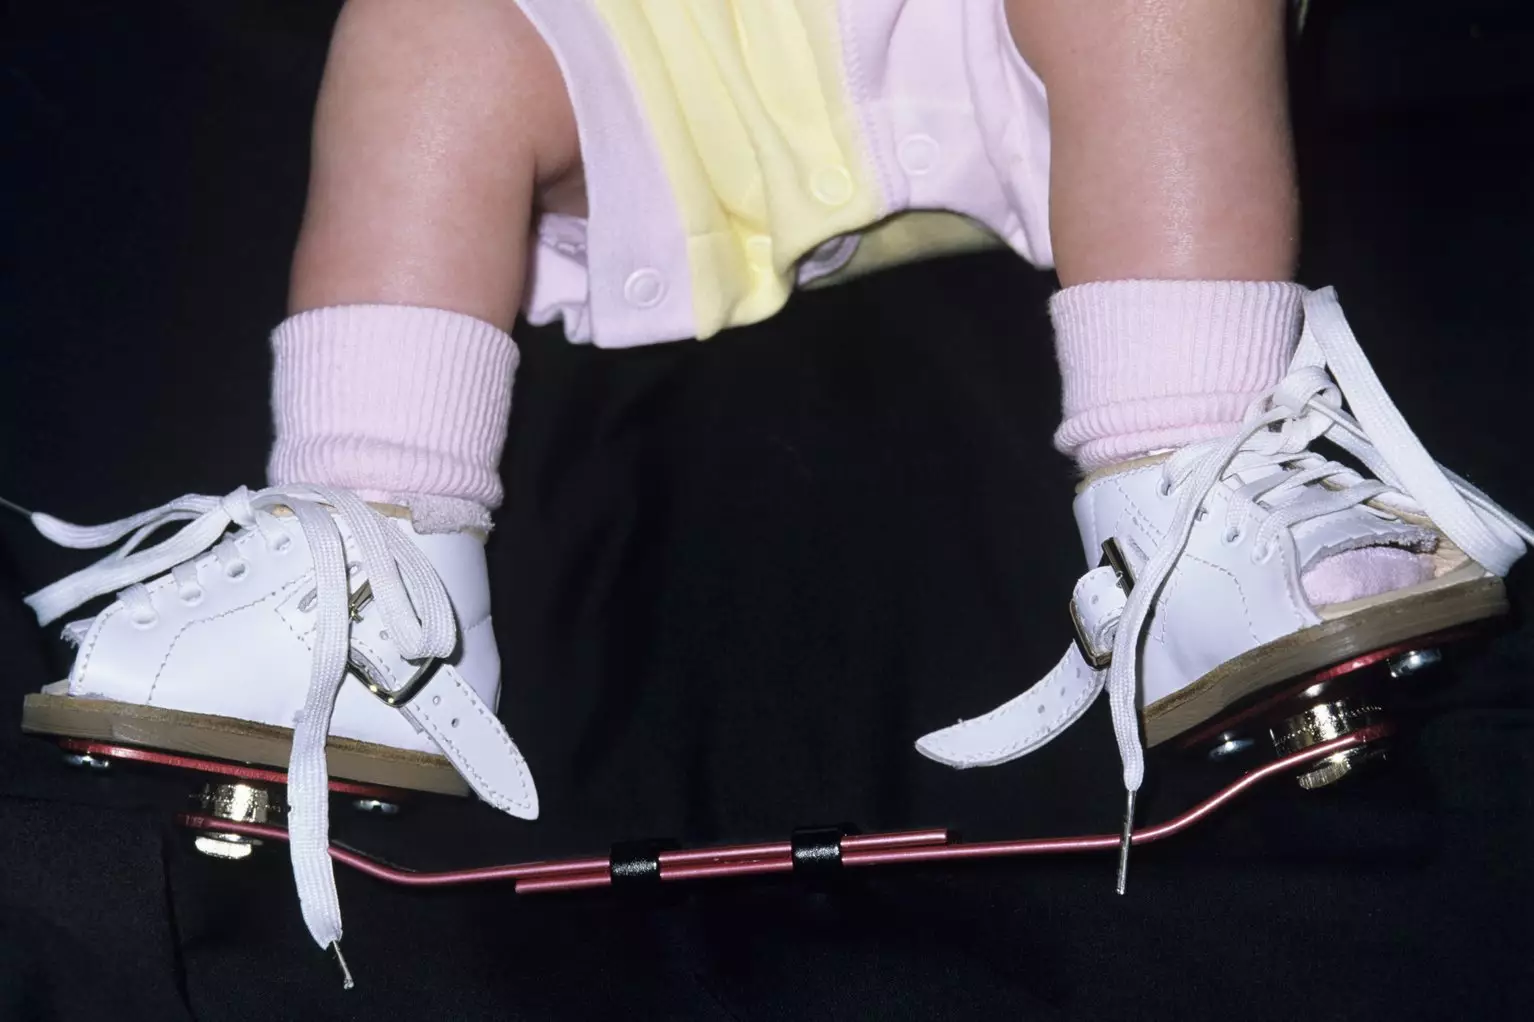 'Your baby will need to wear special boots attached to each other with a bar to prevent the club foot returning.' (